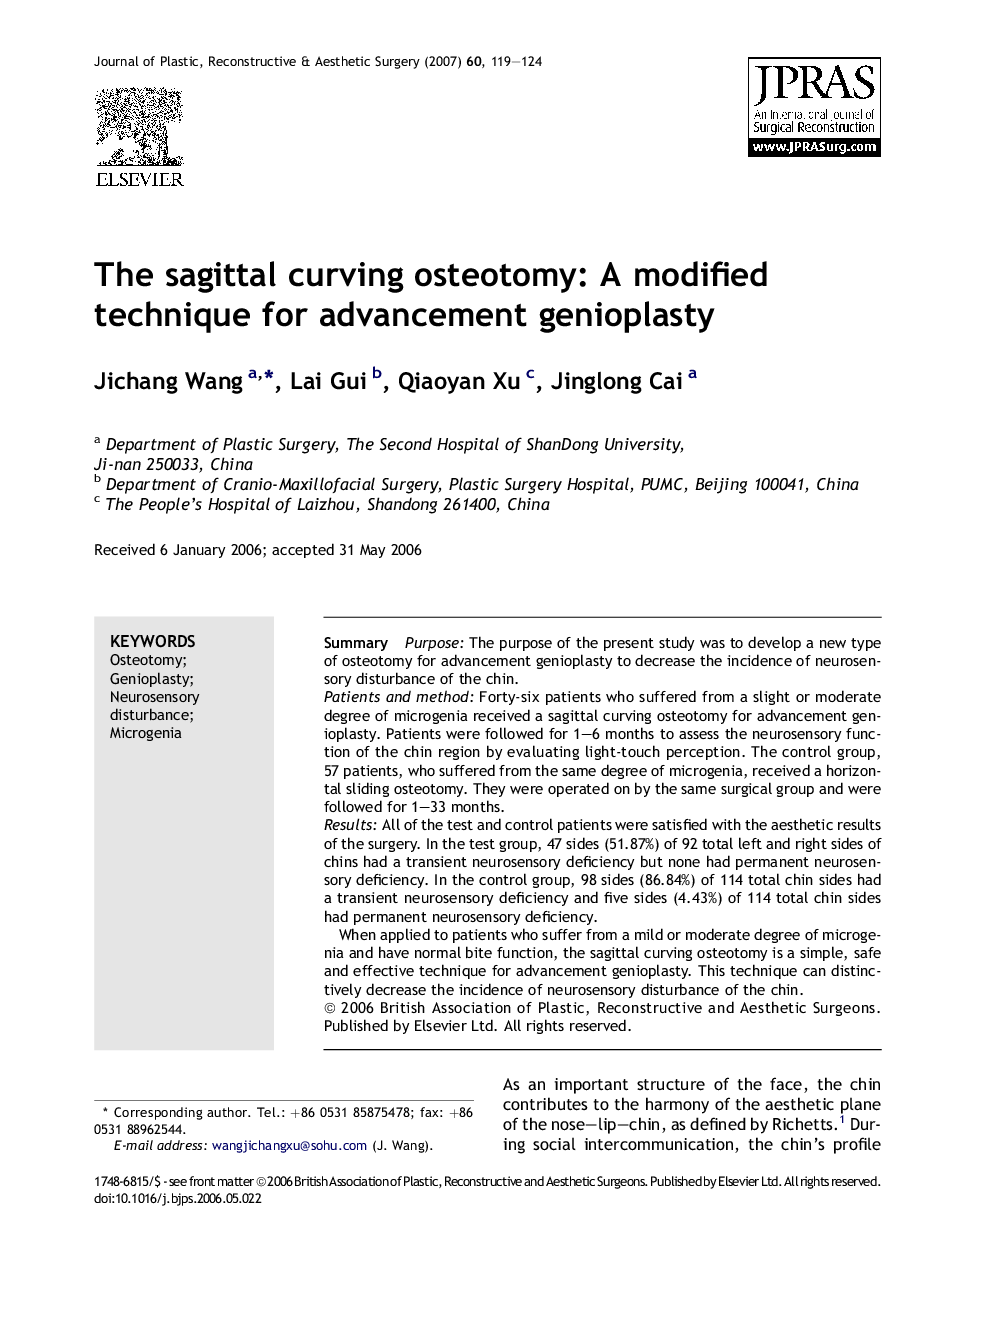 The sagittal curving osteotomy: A modified technique for advancement genioplasty